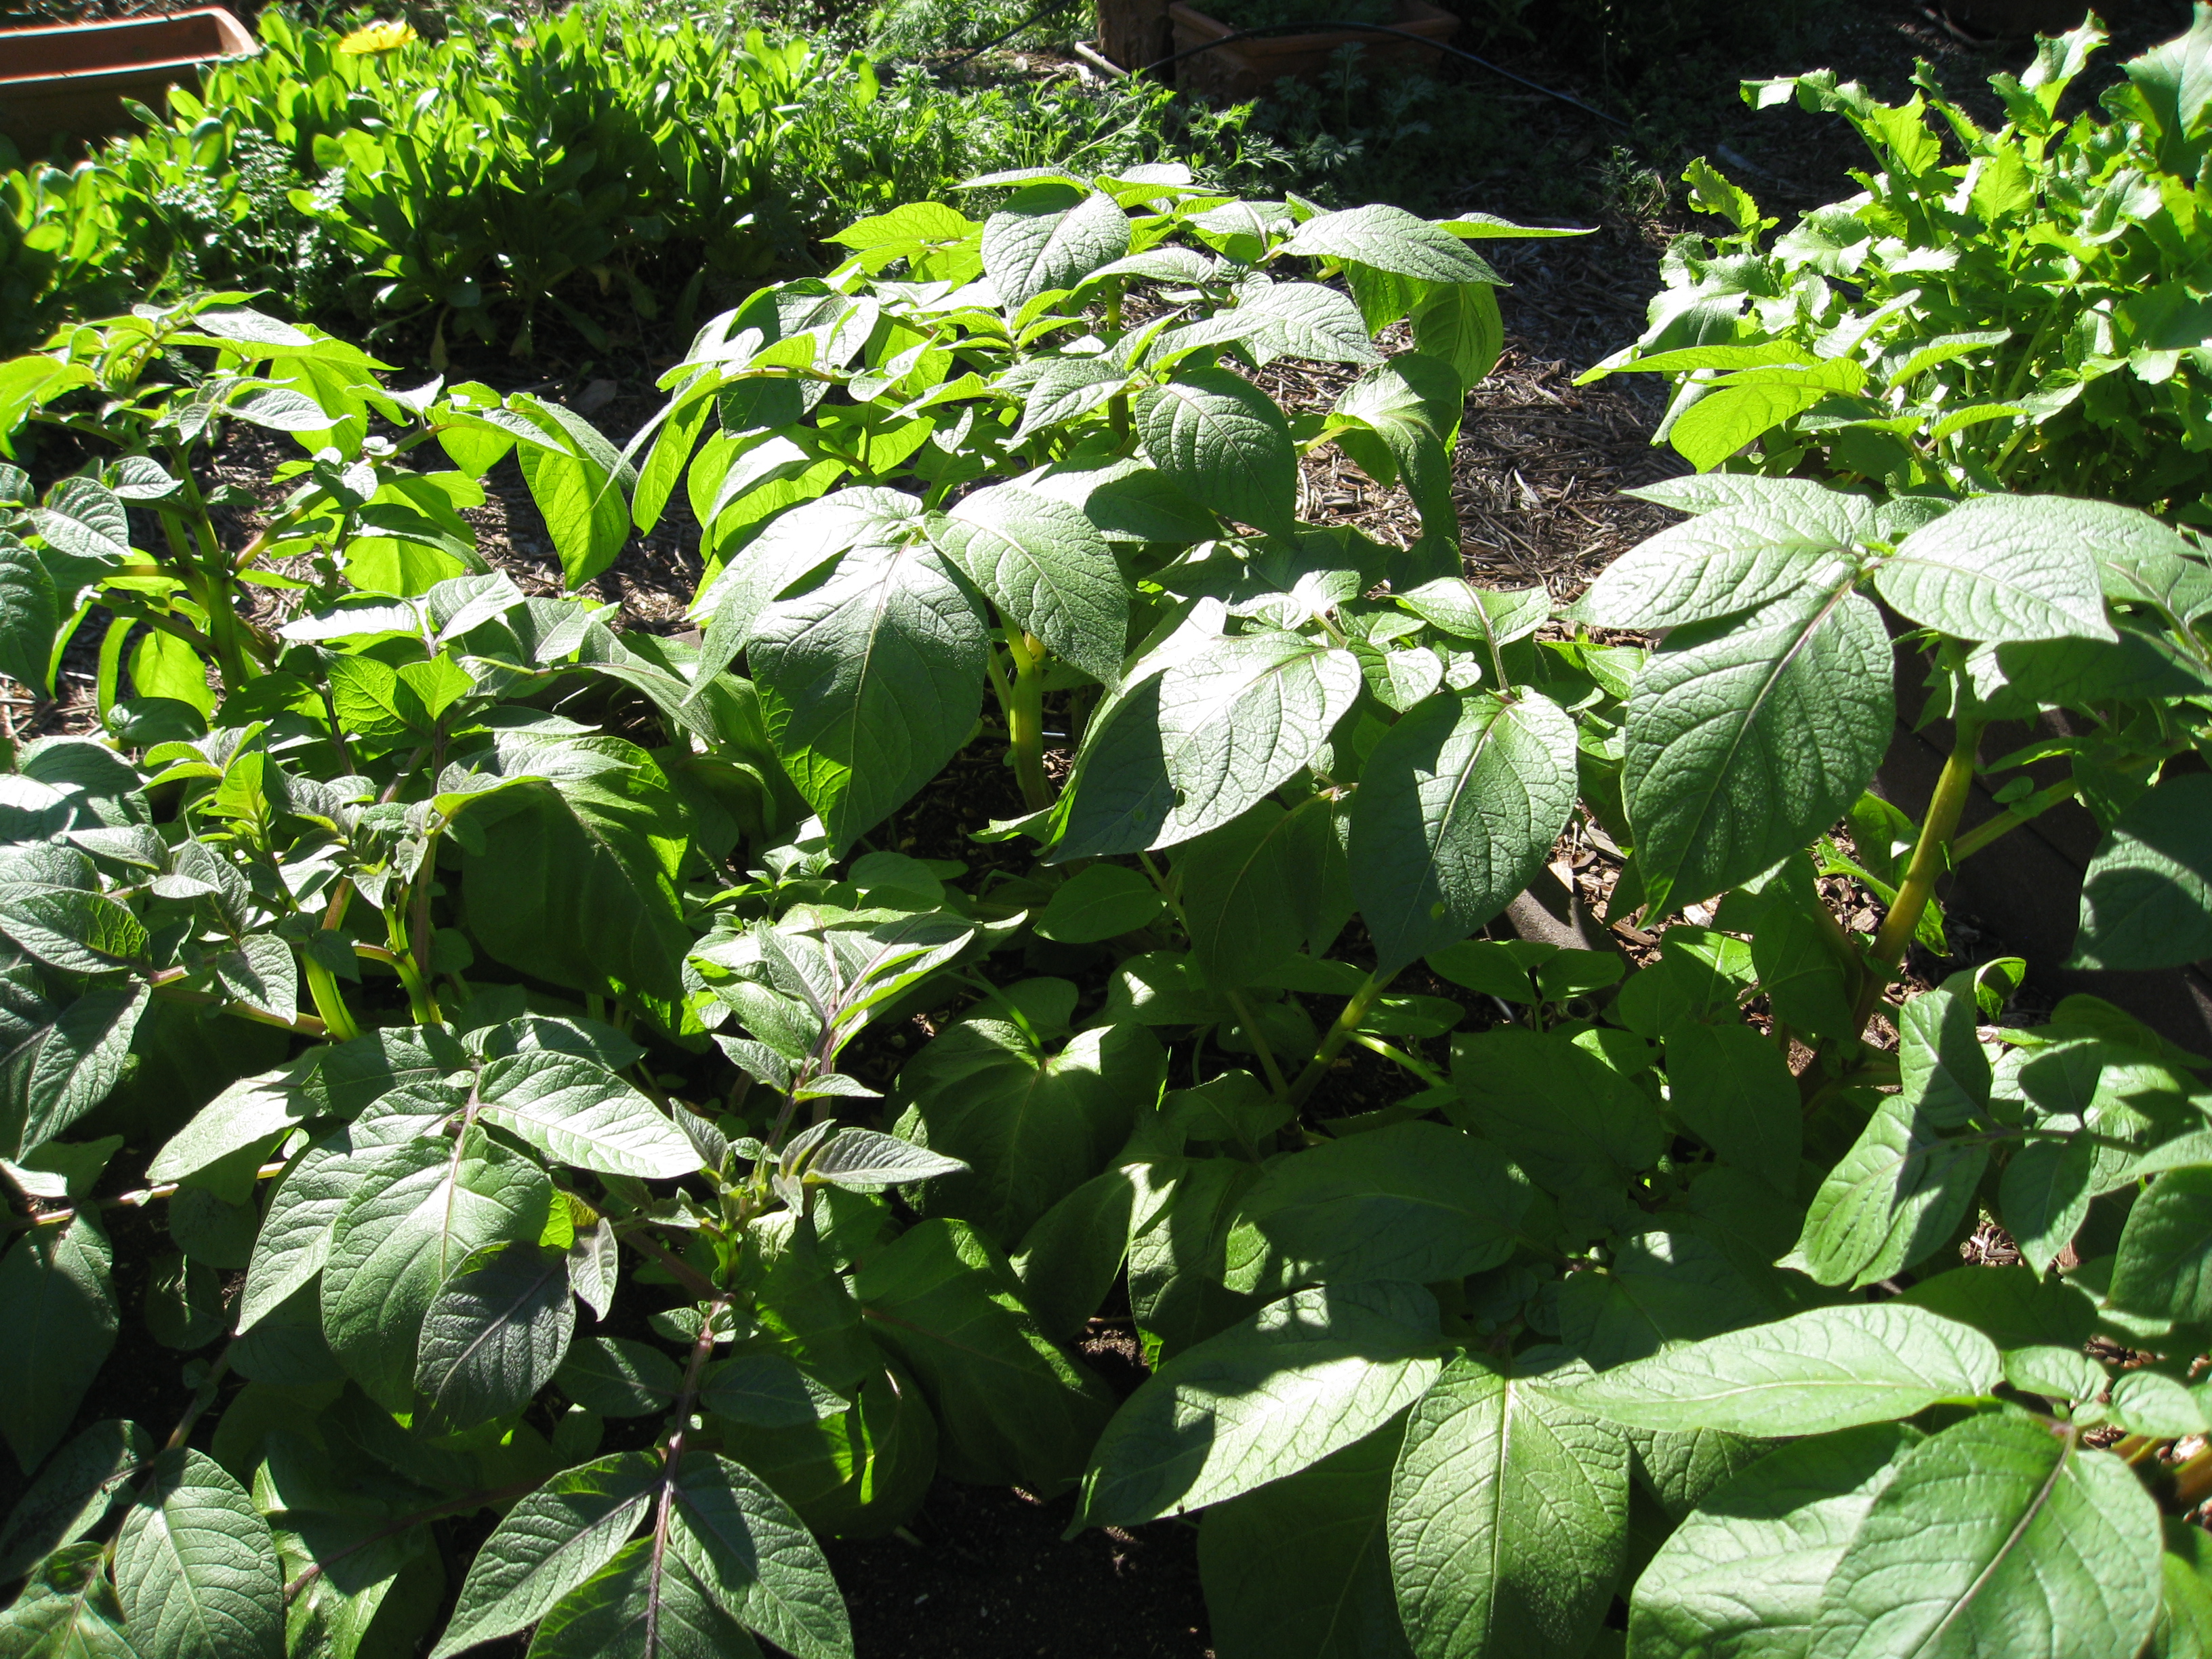 Potatoes grow year-round in warm-winter climates.